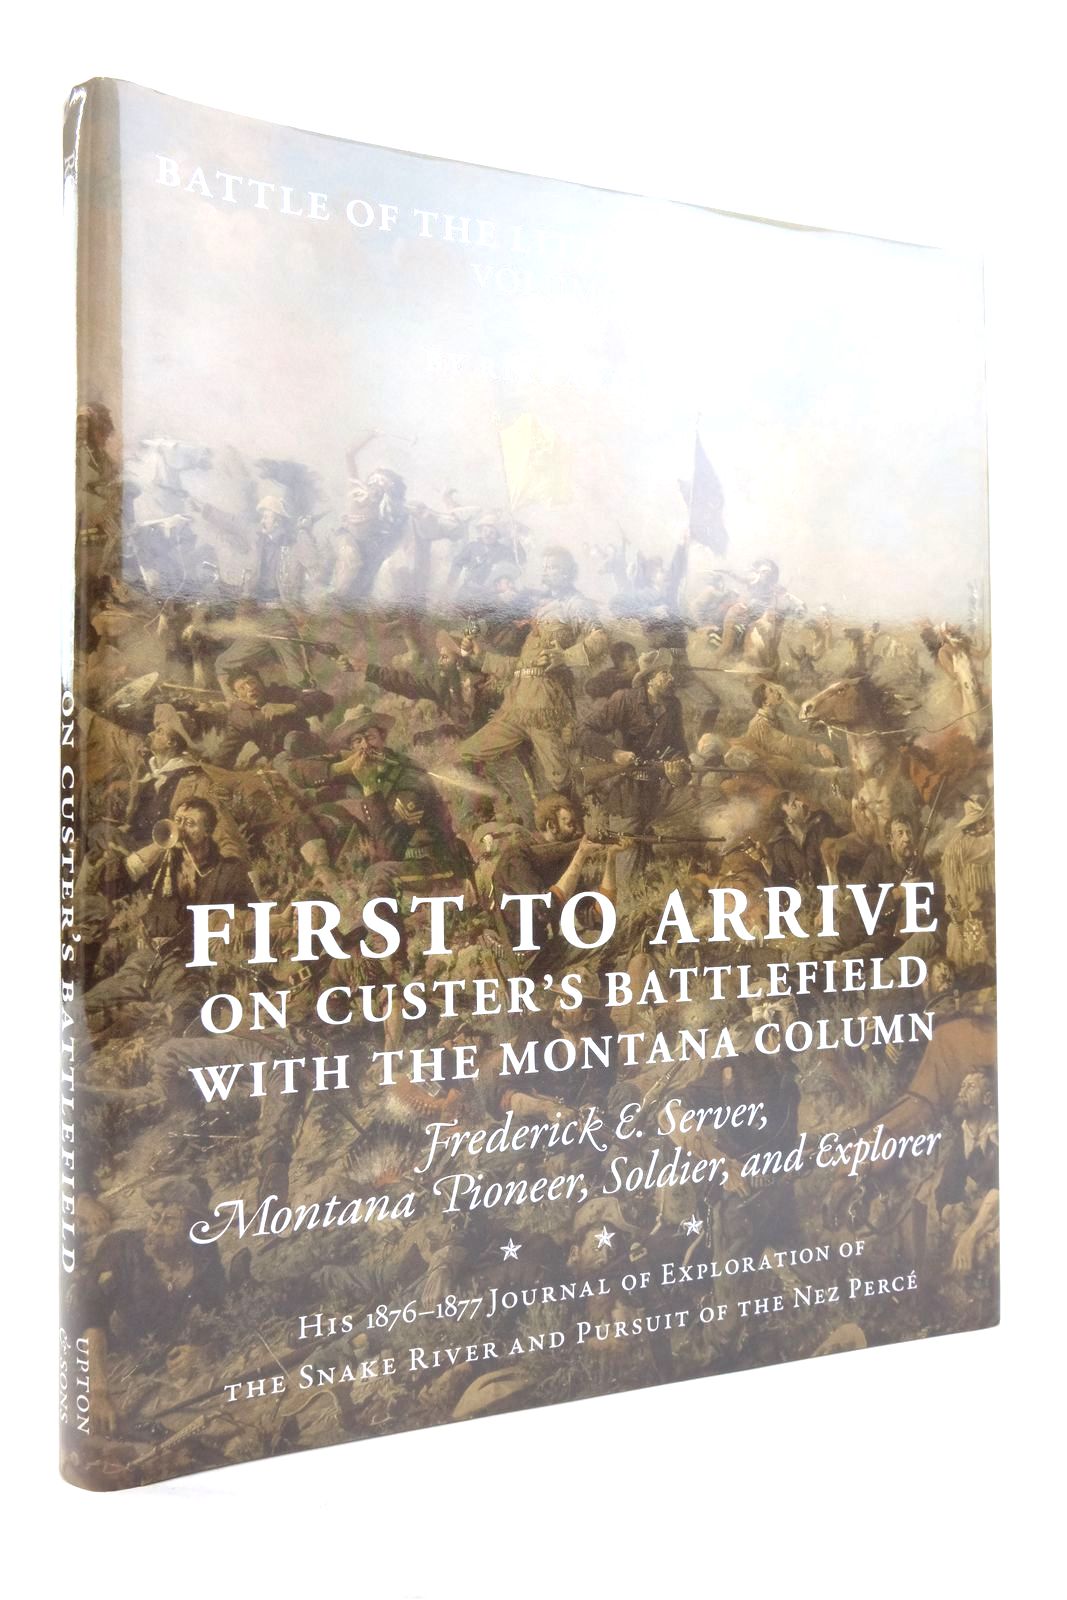 Photo of FIRST TO ARRIVE ON CUSTER'S BATTLEFIELD WITH THE MONTANA COLUMN written by Ross, Richard A. Server, Frederick E. published by Upton And Sons, Publishers (STOCK CODE: 2136604)  for sale by Stella & Rose's Books